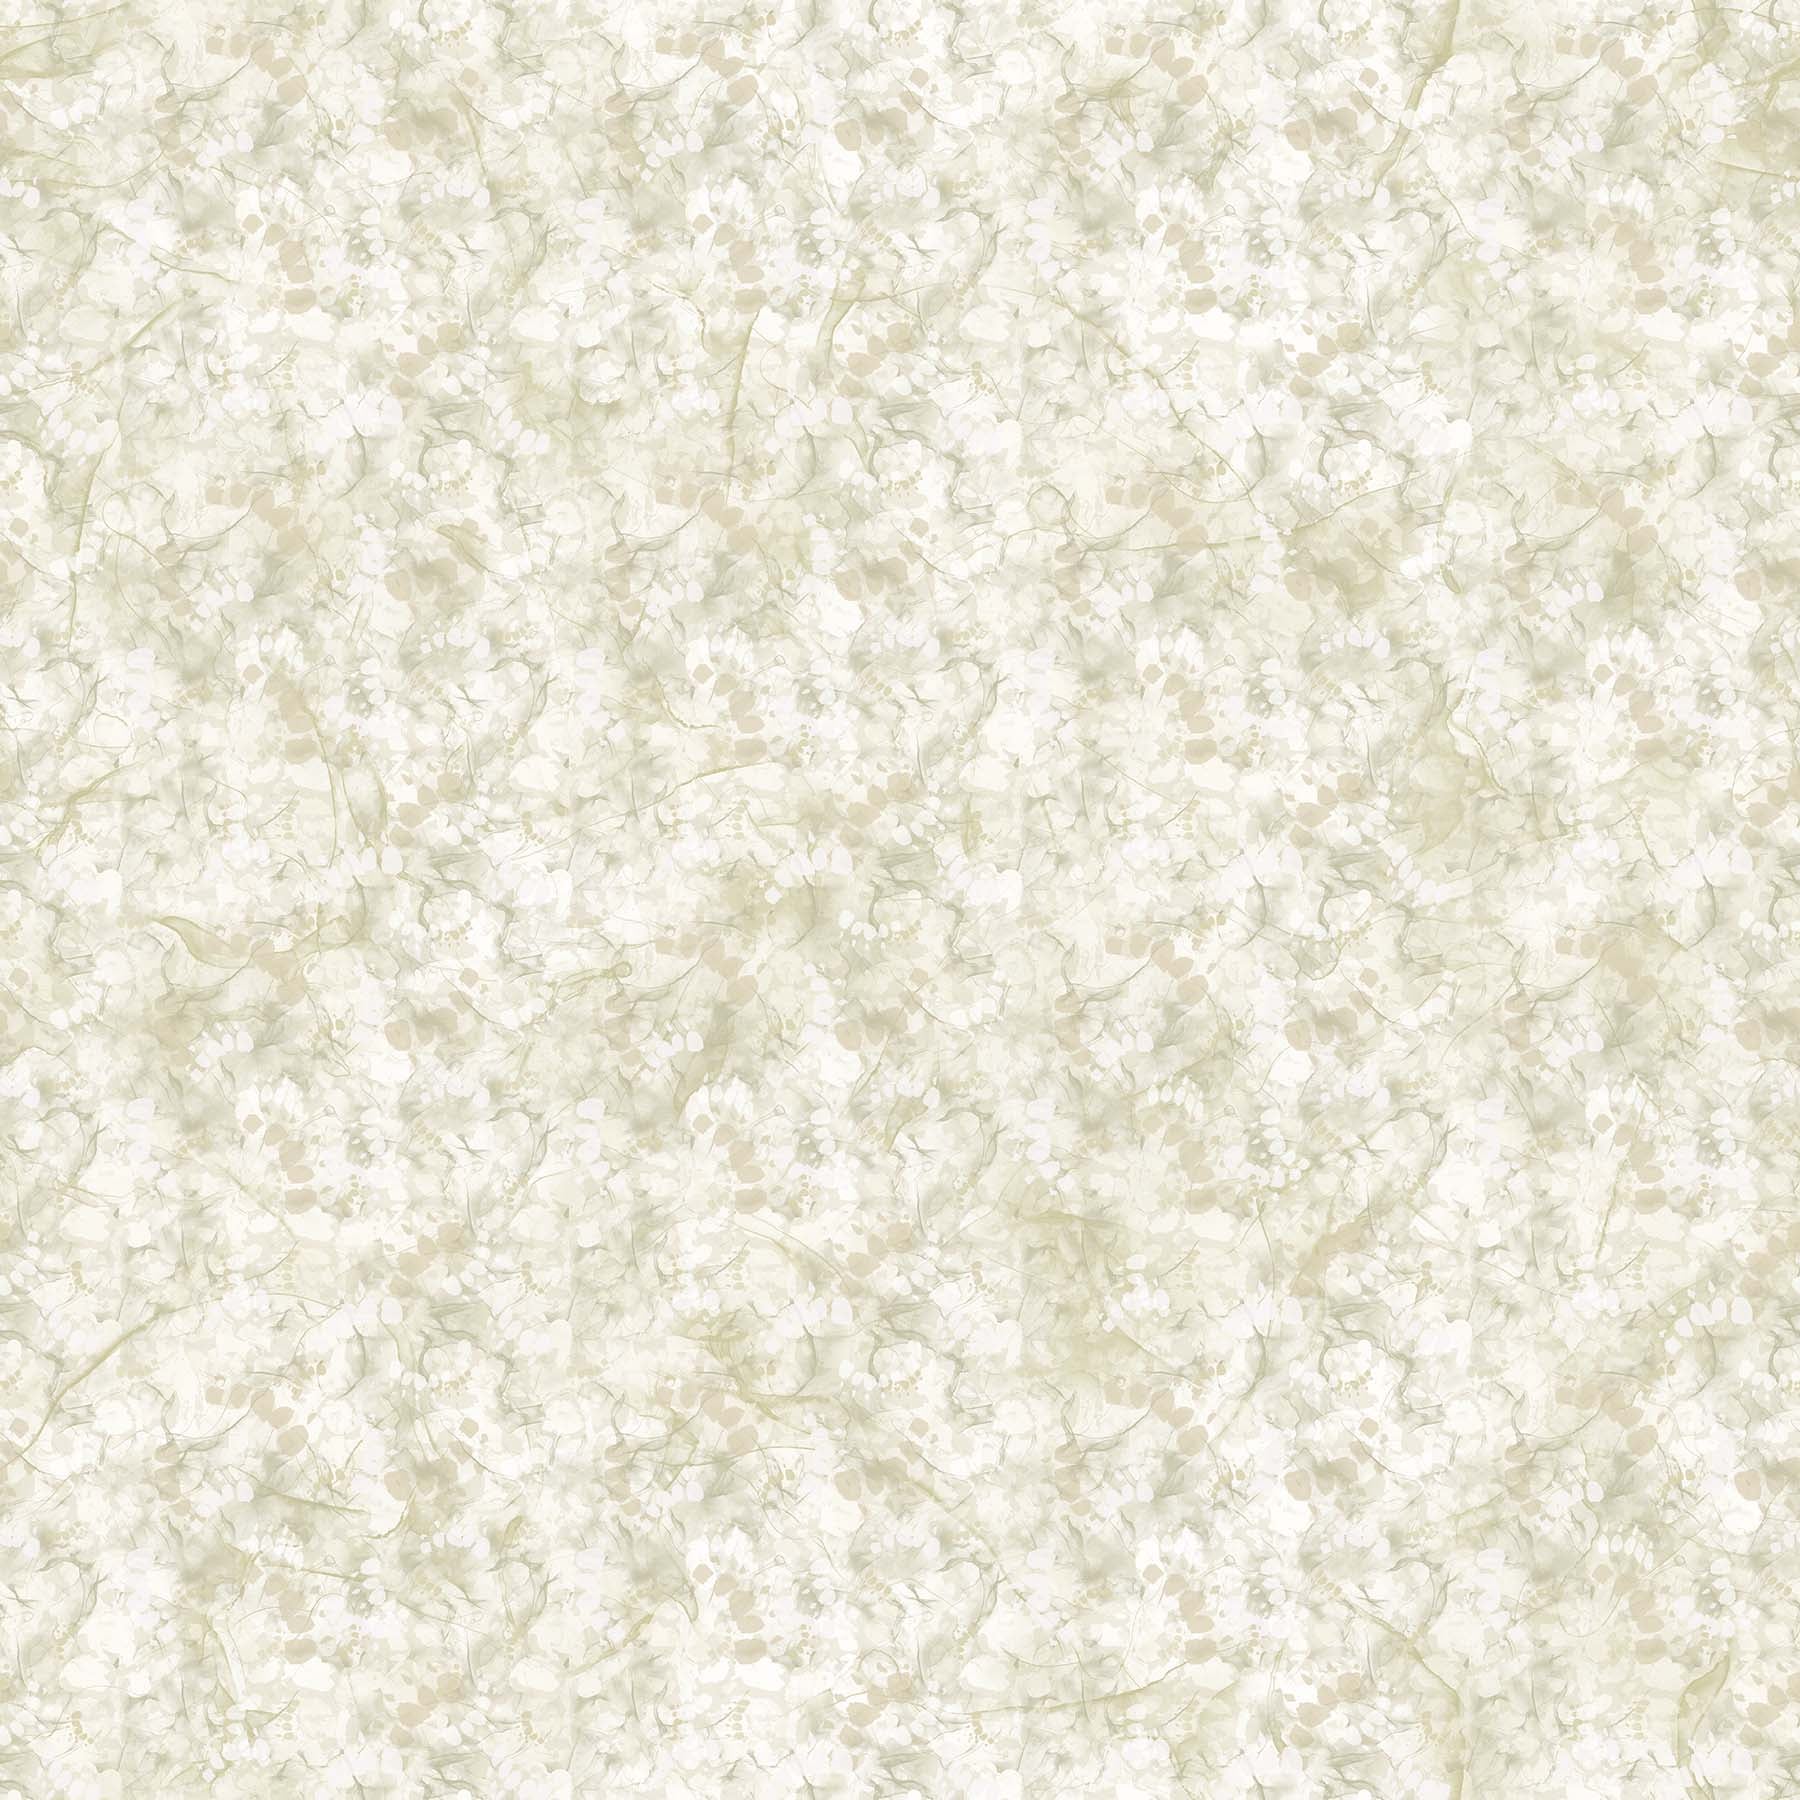 Northern Peaks Quilt Fabric - Paw Print in Cream - DP25173-12